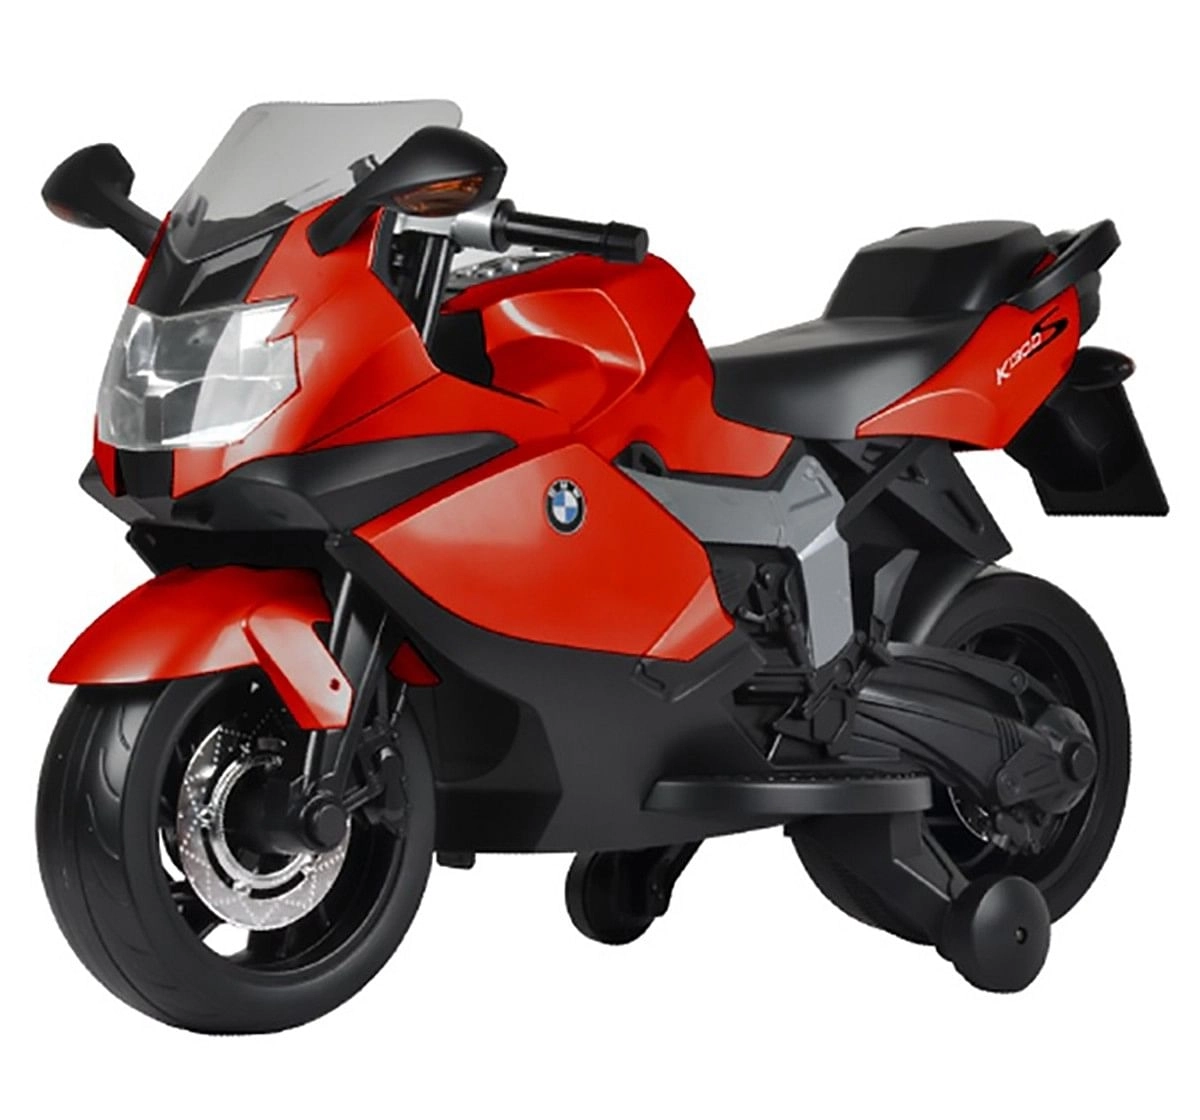 Chilokbo BMW K1300S Battery Operated Ride-On Bike for Kids age 3Y+ 